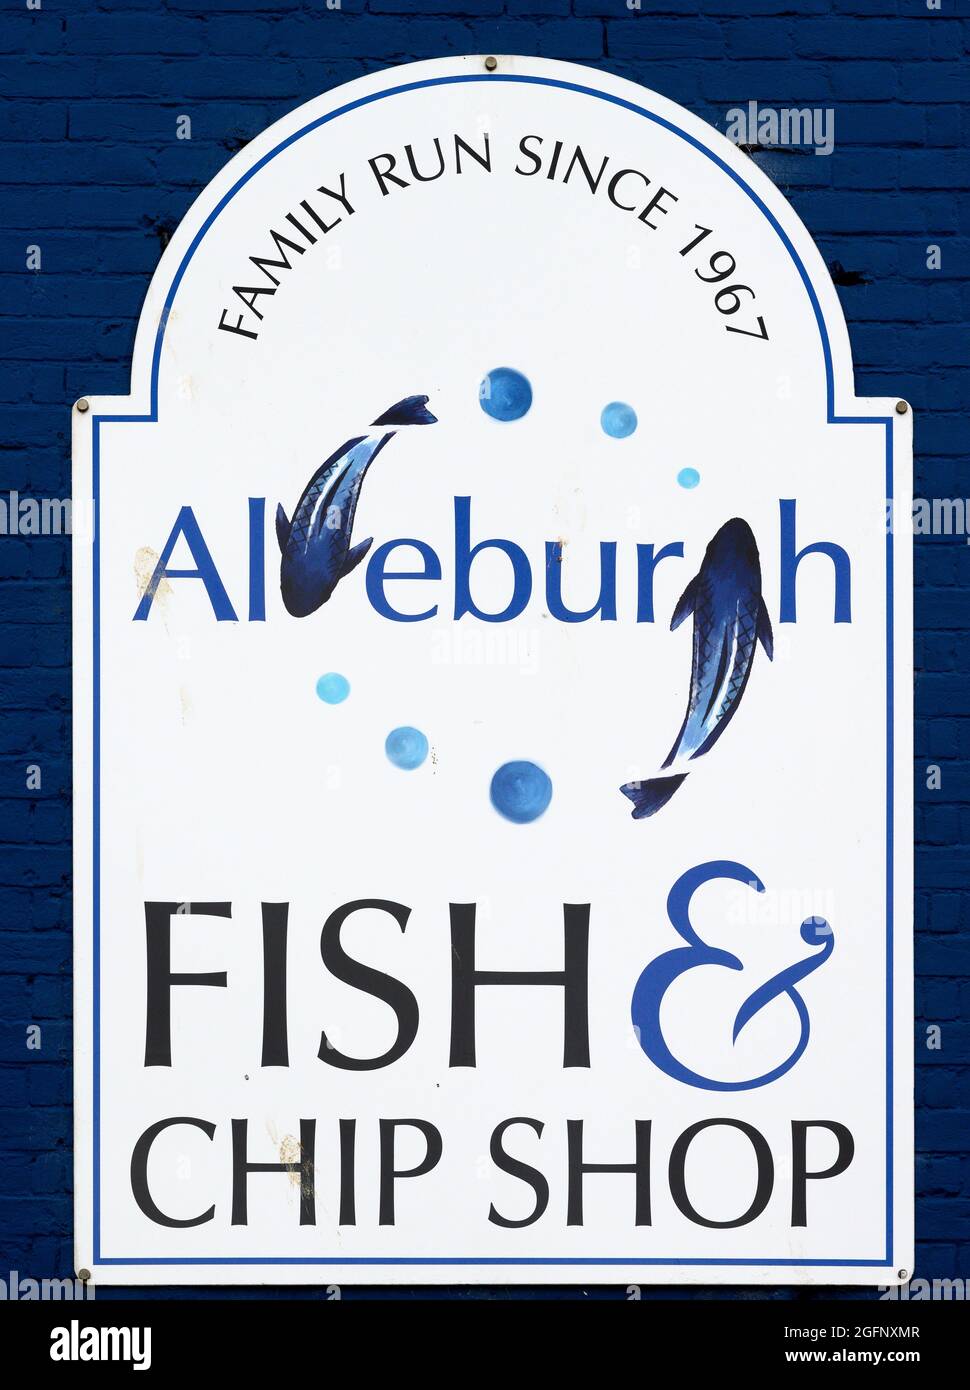 Fish and Chip Shop, Aldeburgh, Suffolk, East Anglia, England, UK Stock Photo